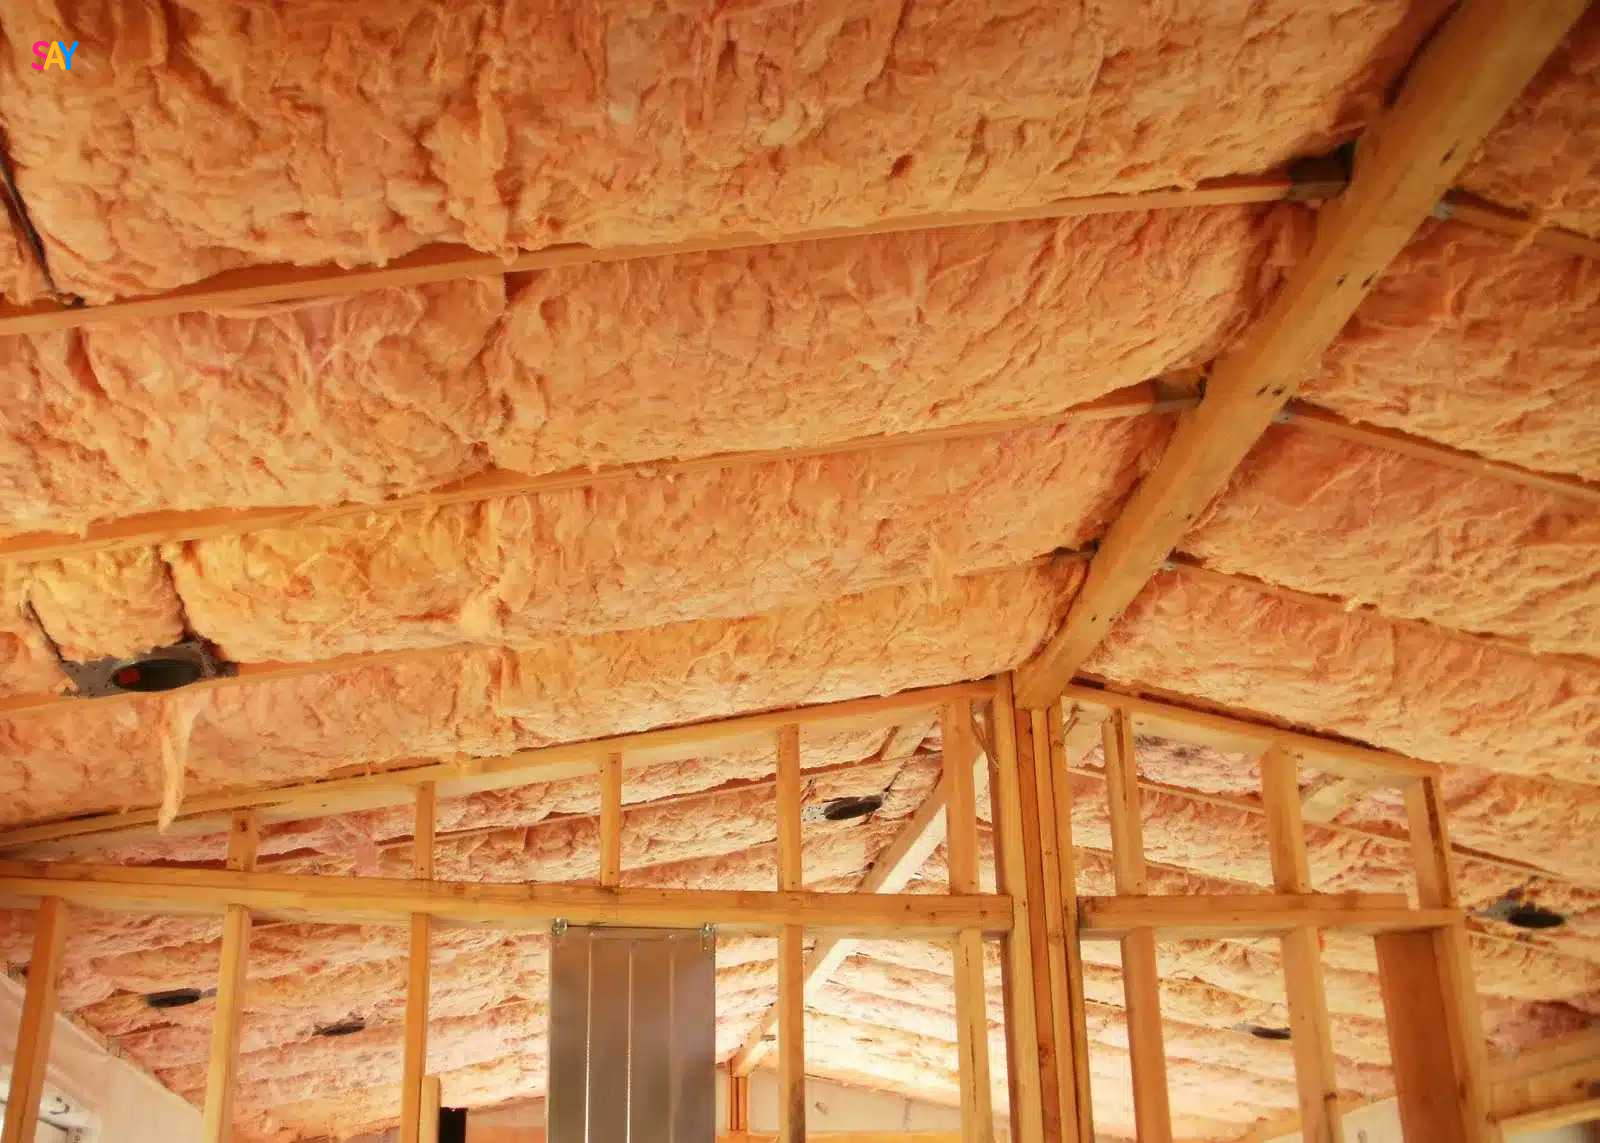 Our team of expert residential insulation contractors is here to provide you with the best residential insulation services. At JAV Insulation, we take pride in being the leading residential insulation company in the area. When it comes to residential insulation installation, we are the name you can trust.